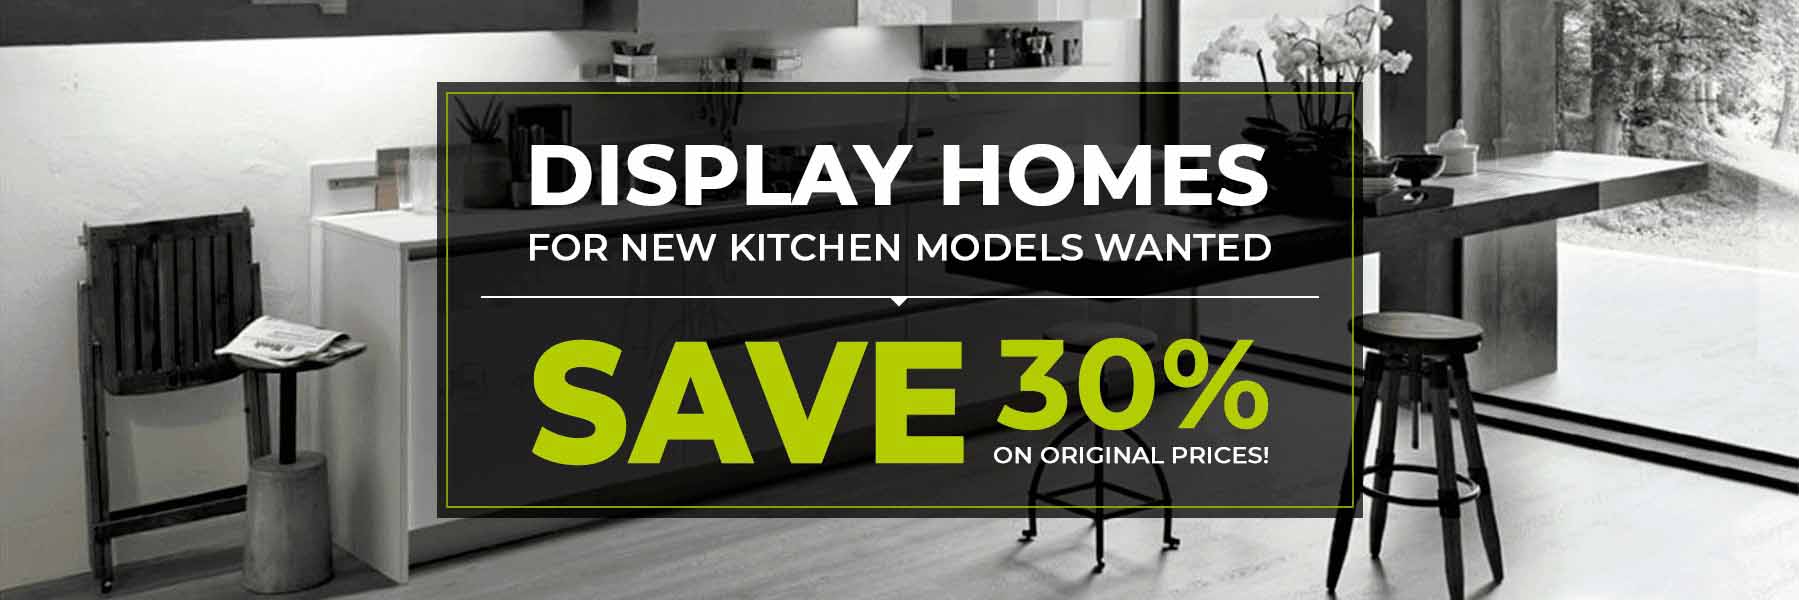 Display Homes for new kitchen models